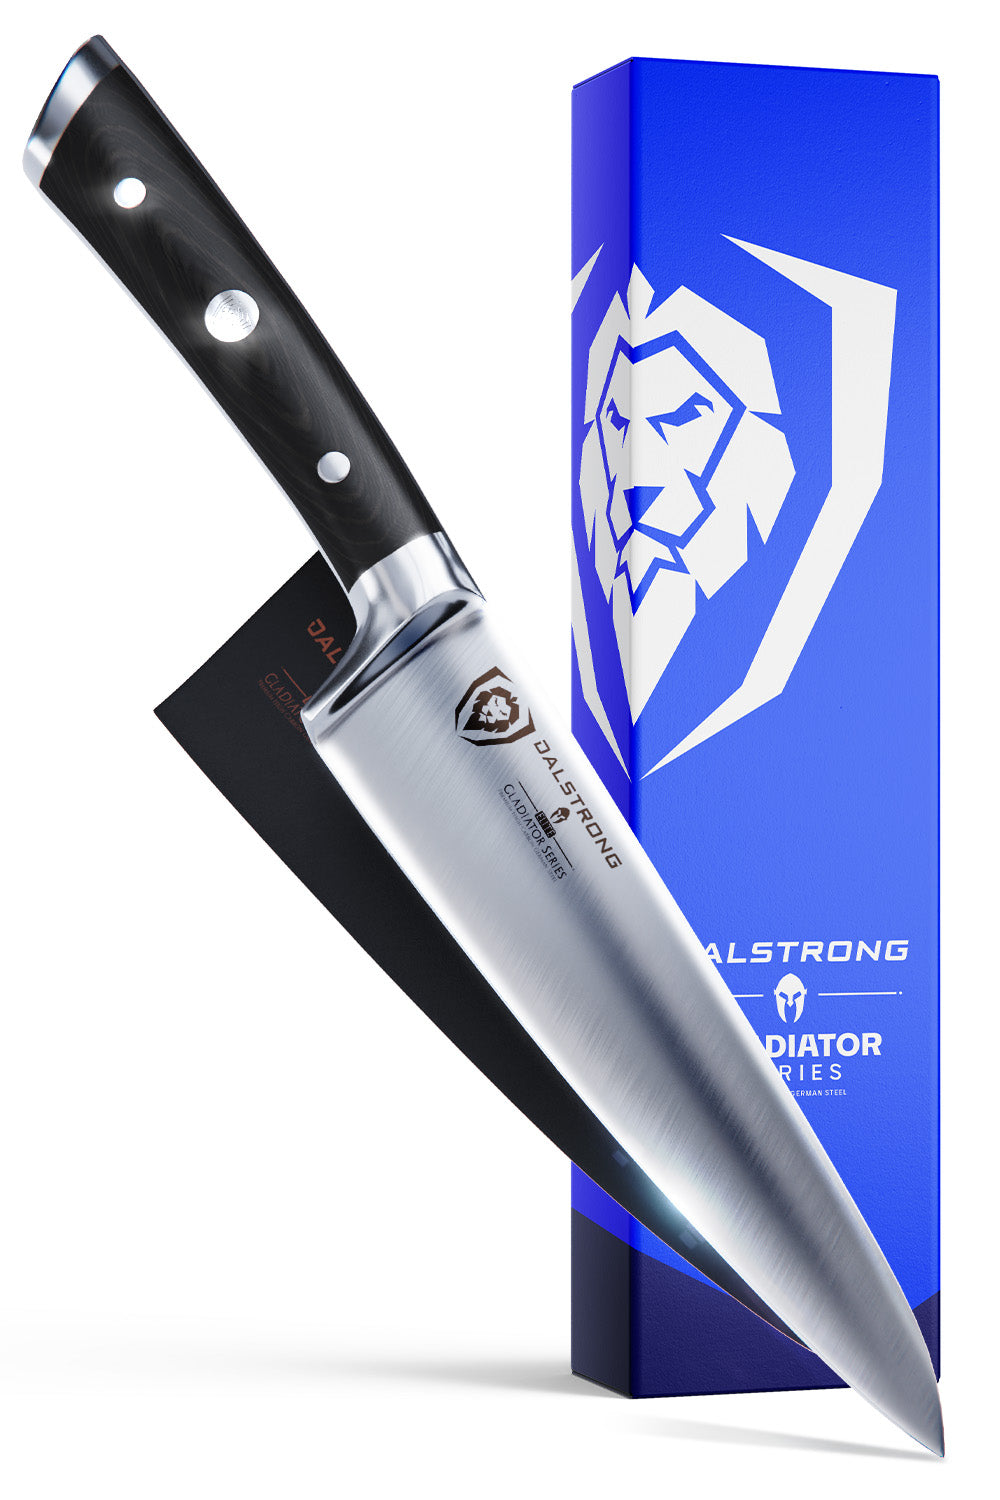 Dalstrong gladiator series 7 inch chef knife with black handle in front of it's premium packaging.